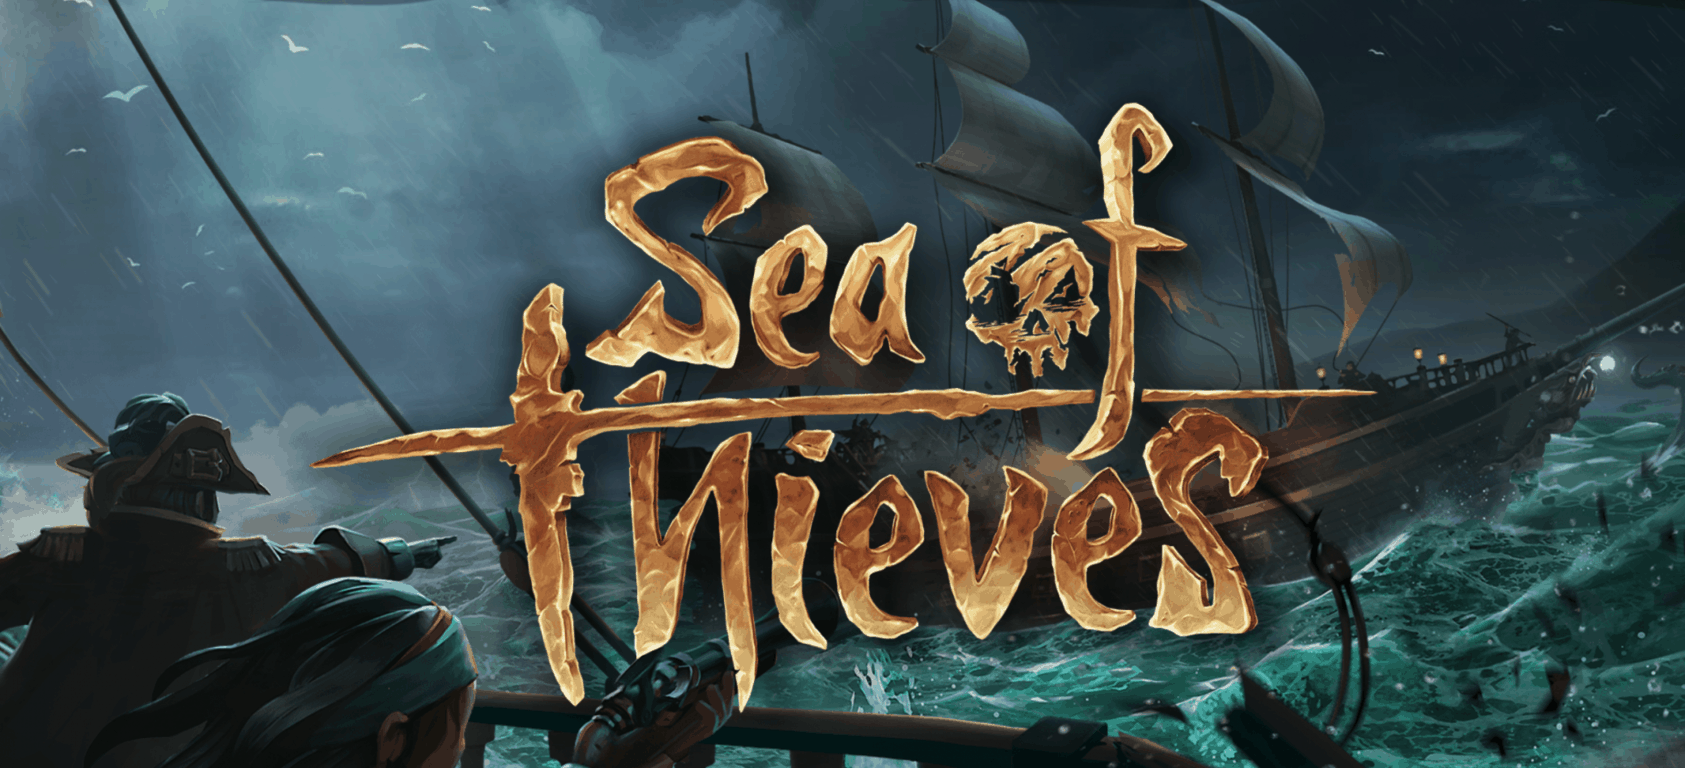 Sea of Thieves will have its first Technical Alpha play weekend starting December 16 - OnMSFT.com - December 8, 2016